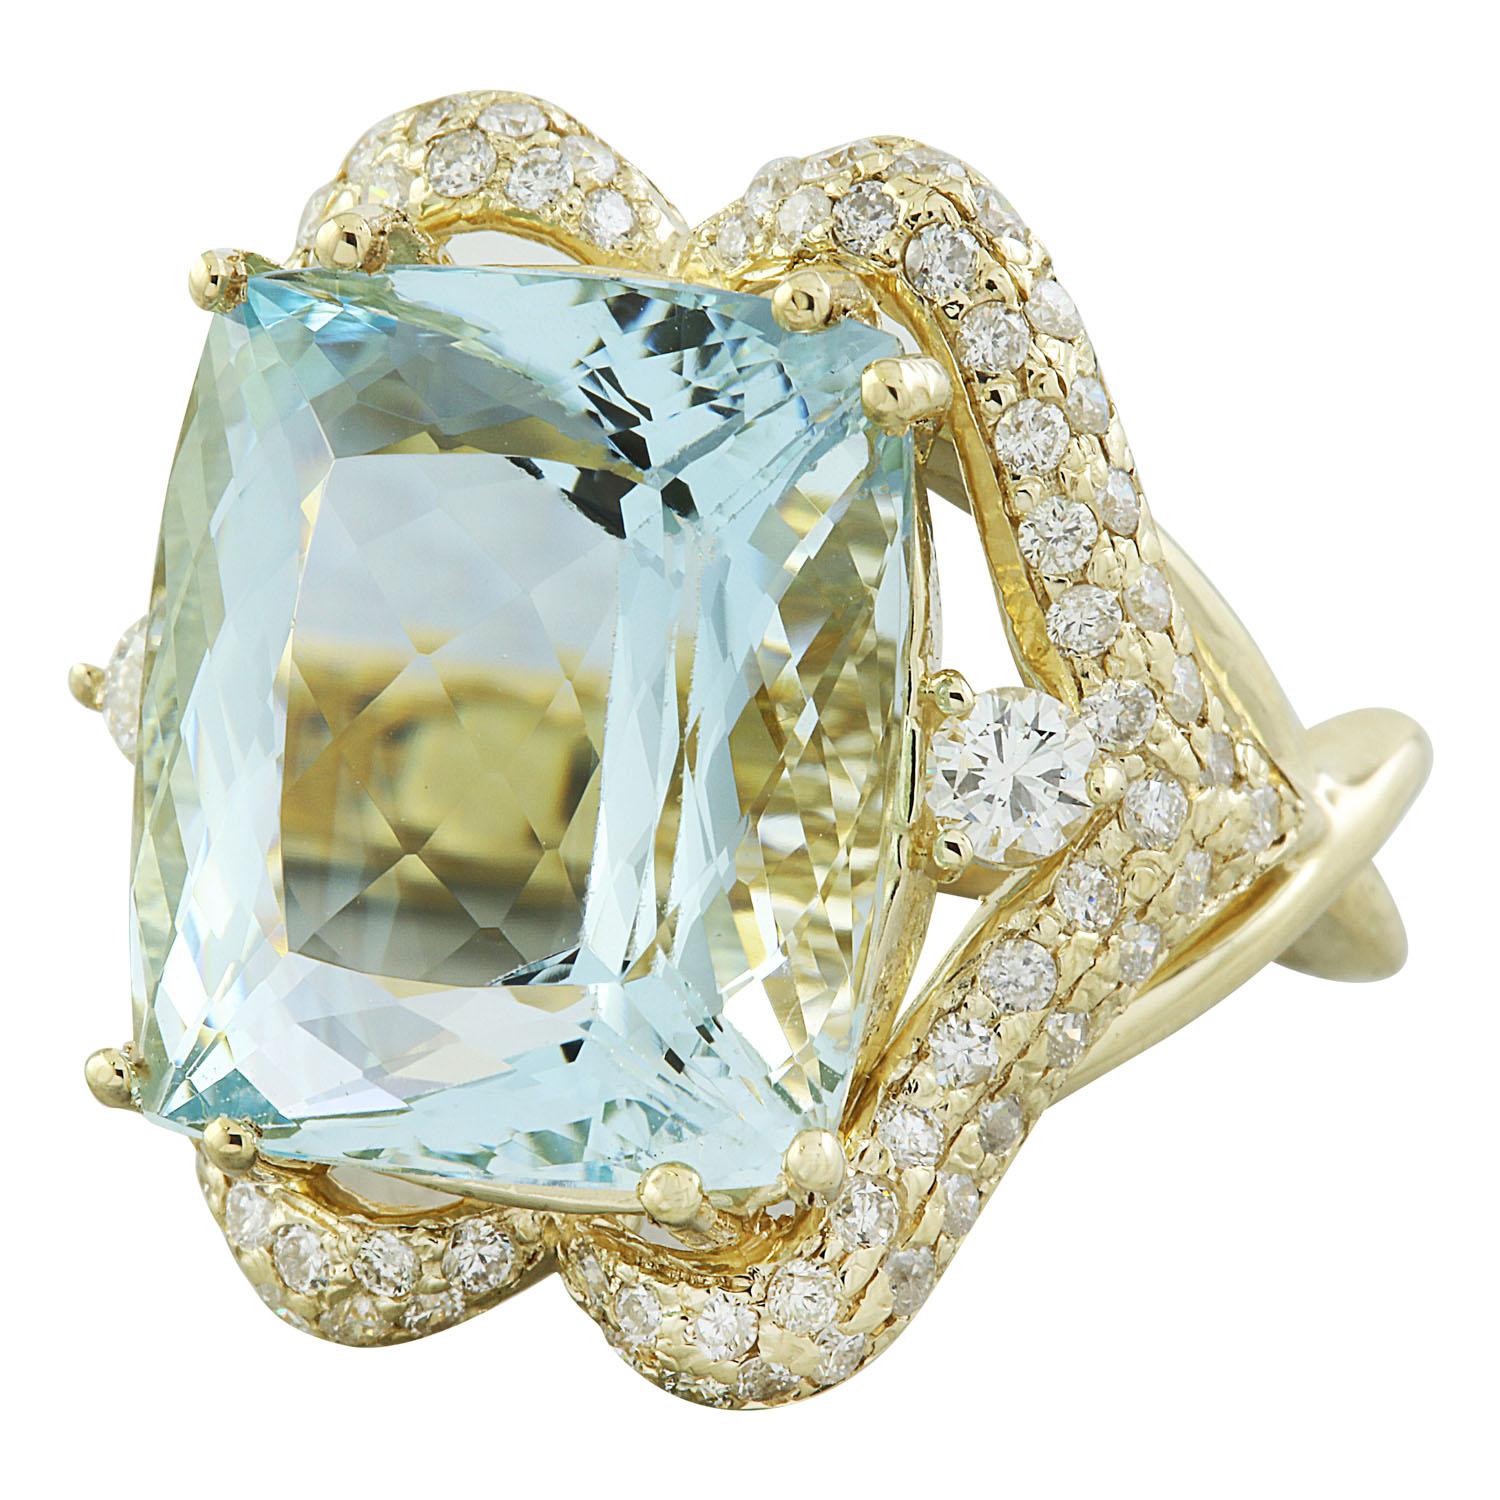 16.40 Carat Natural Aquamarine 14 Karat Solid Yellow Gold Diamond Ring
Stamped: 14K
Total Ring Weight: 11.1 Grams 
Aquamarine Weight 15.30 Carat (16.00x14.00 Millimeters)
Diamond Weight: 1.10 carat (F-G Color, VS2-SI1 Clarity )
Face Measures: